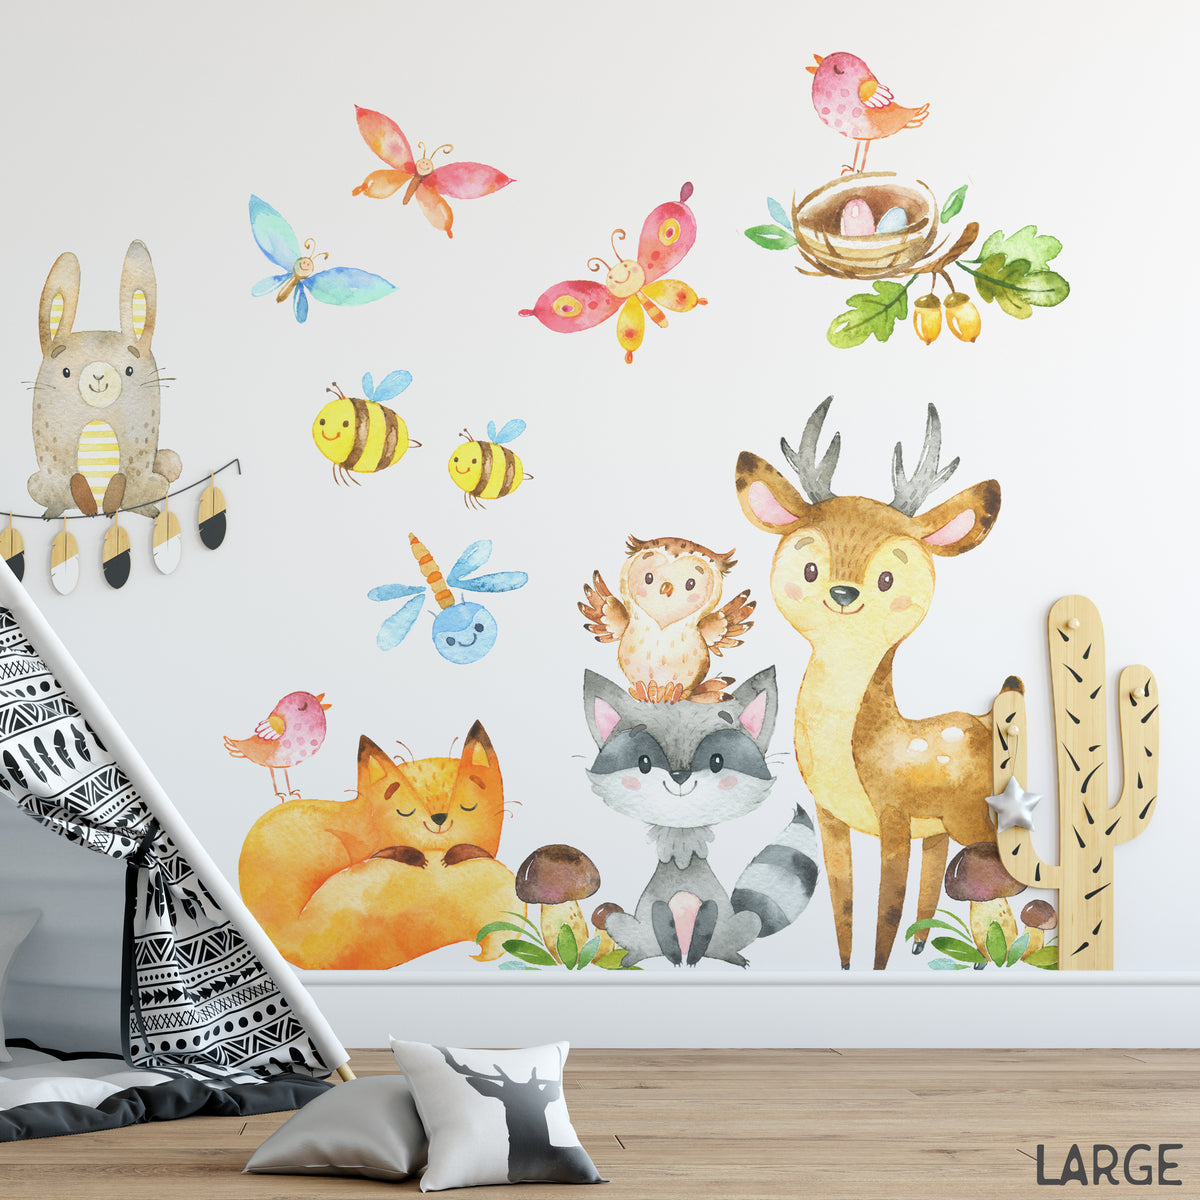 Vinyl Wall Decal Bedroom Abstract Moon Deer Animal Forest Stickers Mur —  Wallstickers4you